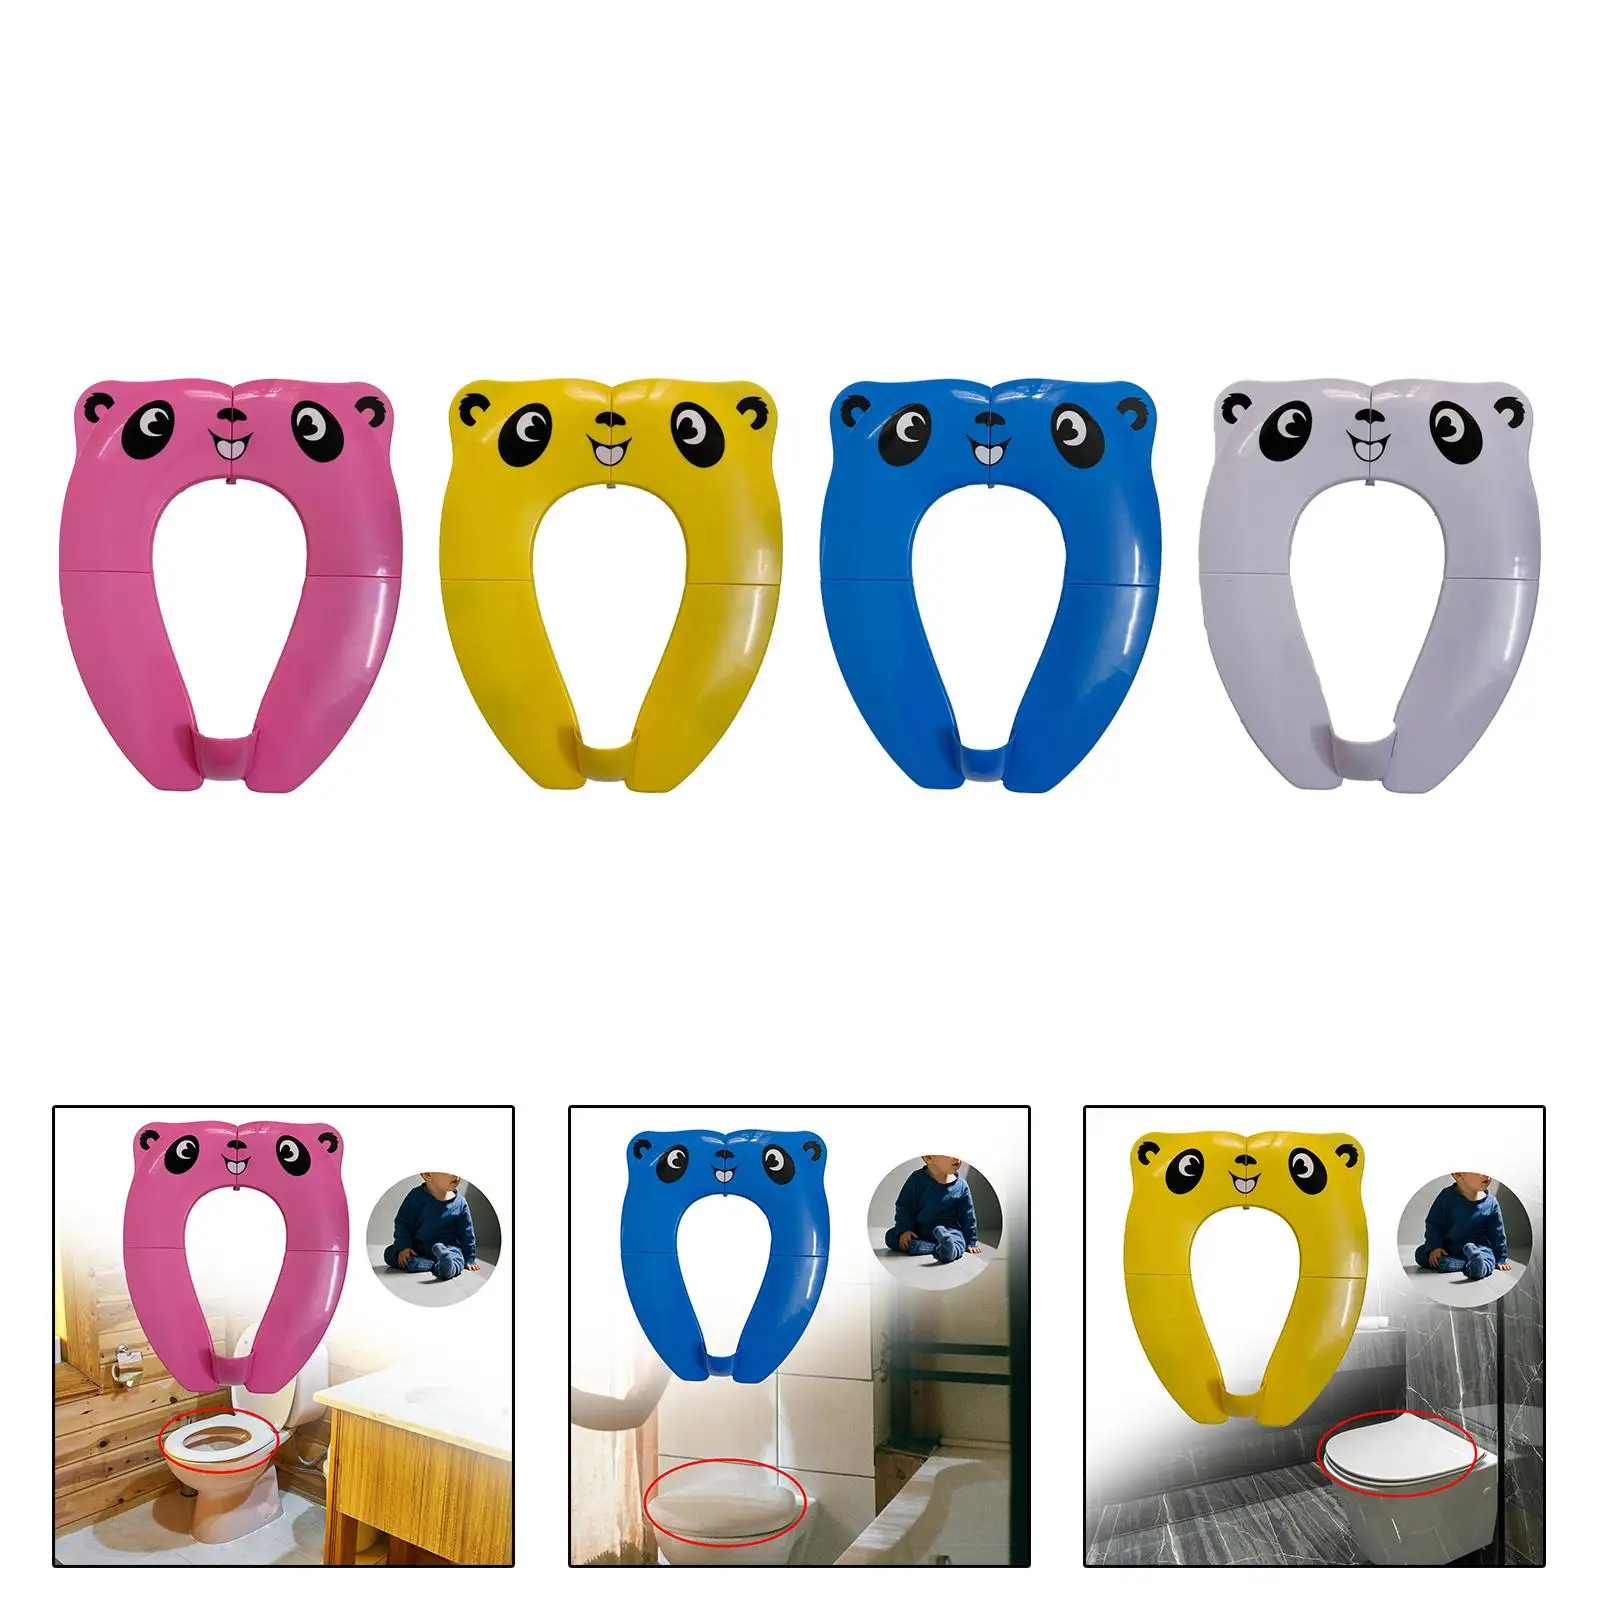 Foldable Toilet Seat Reusable Toilet Pad with Splash Guard Potty Toilet Seat for Household Baby Boys Girls Kids